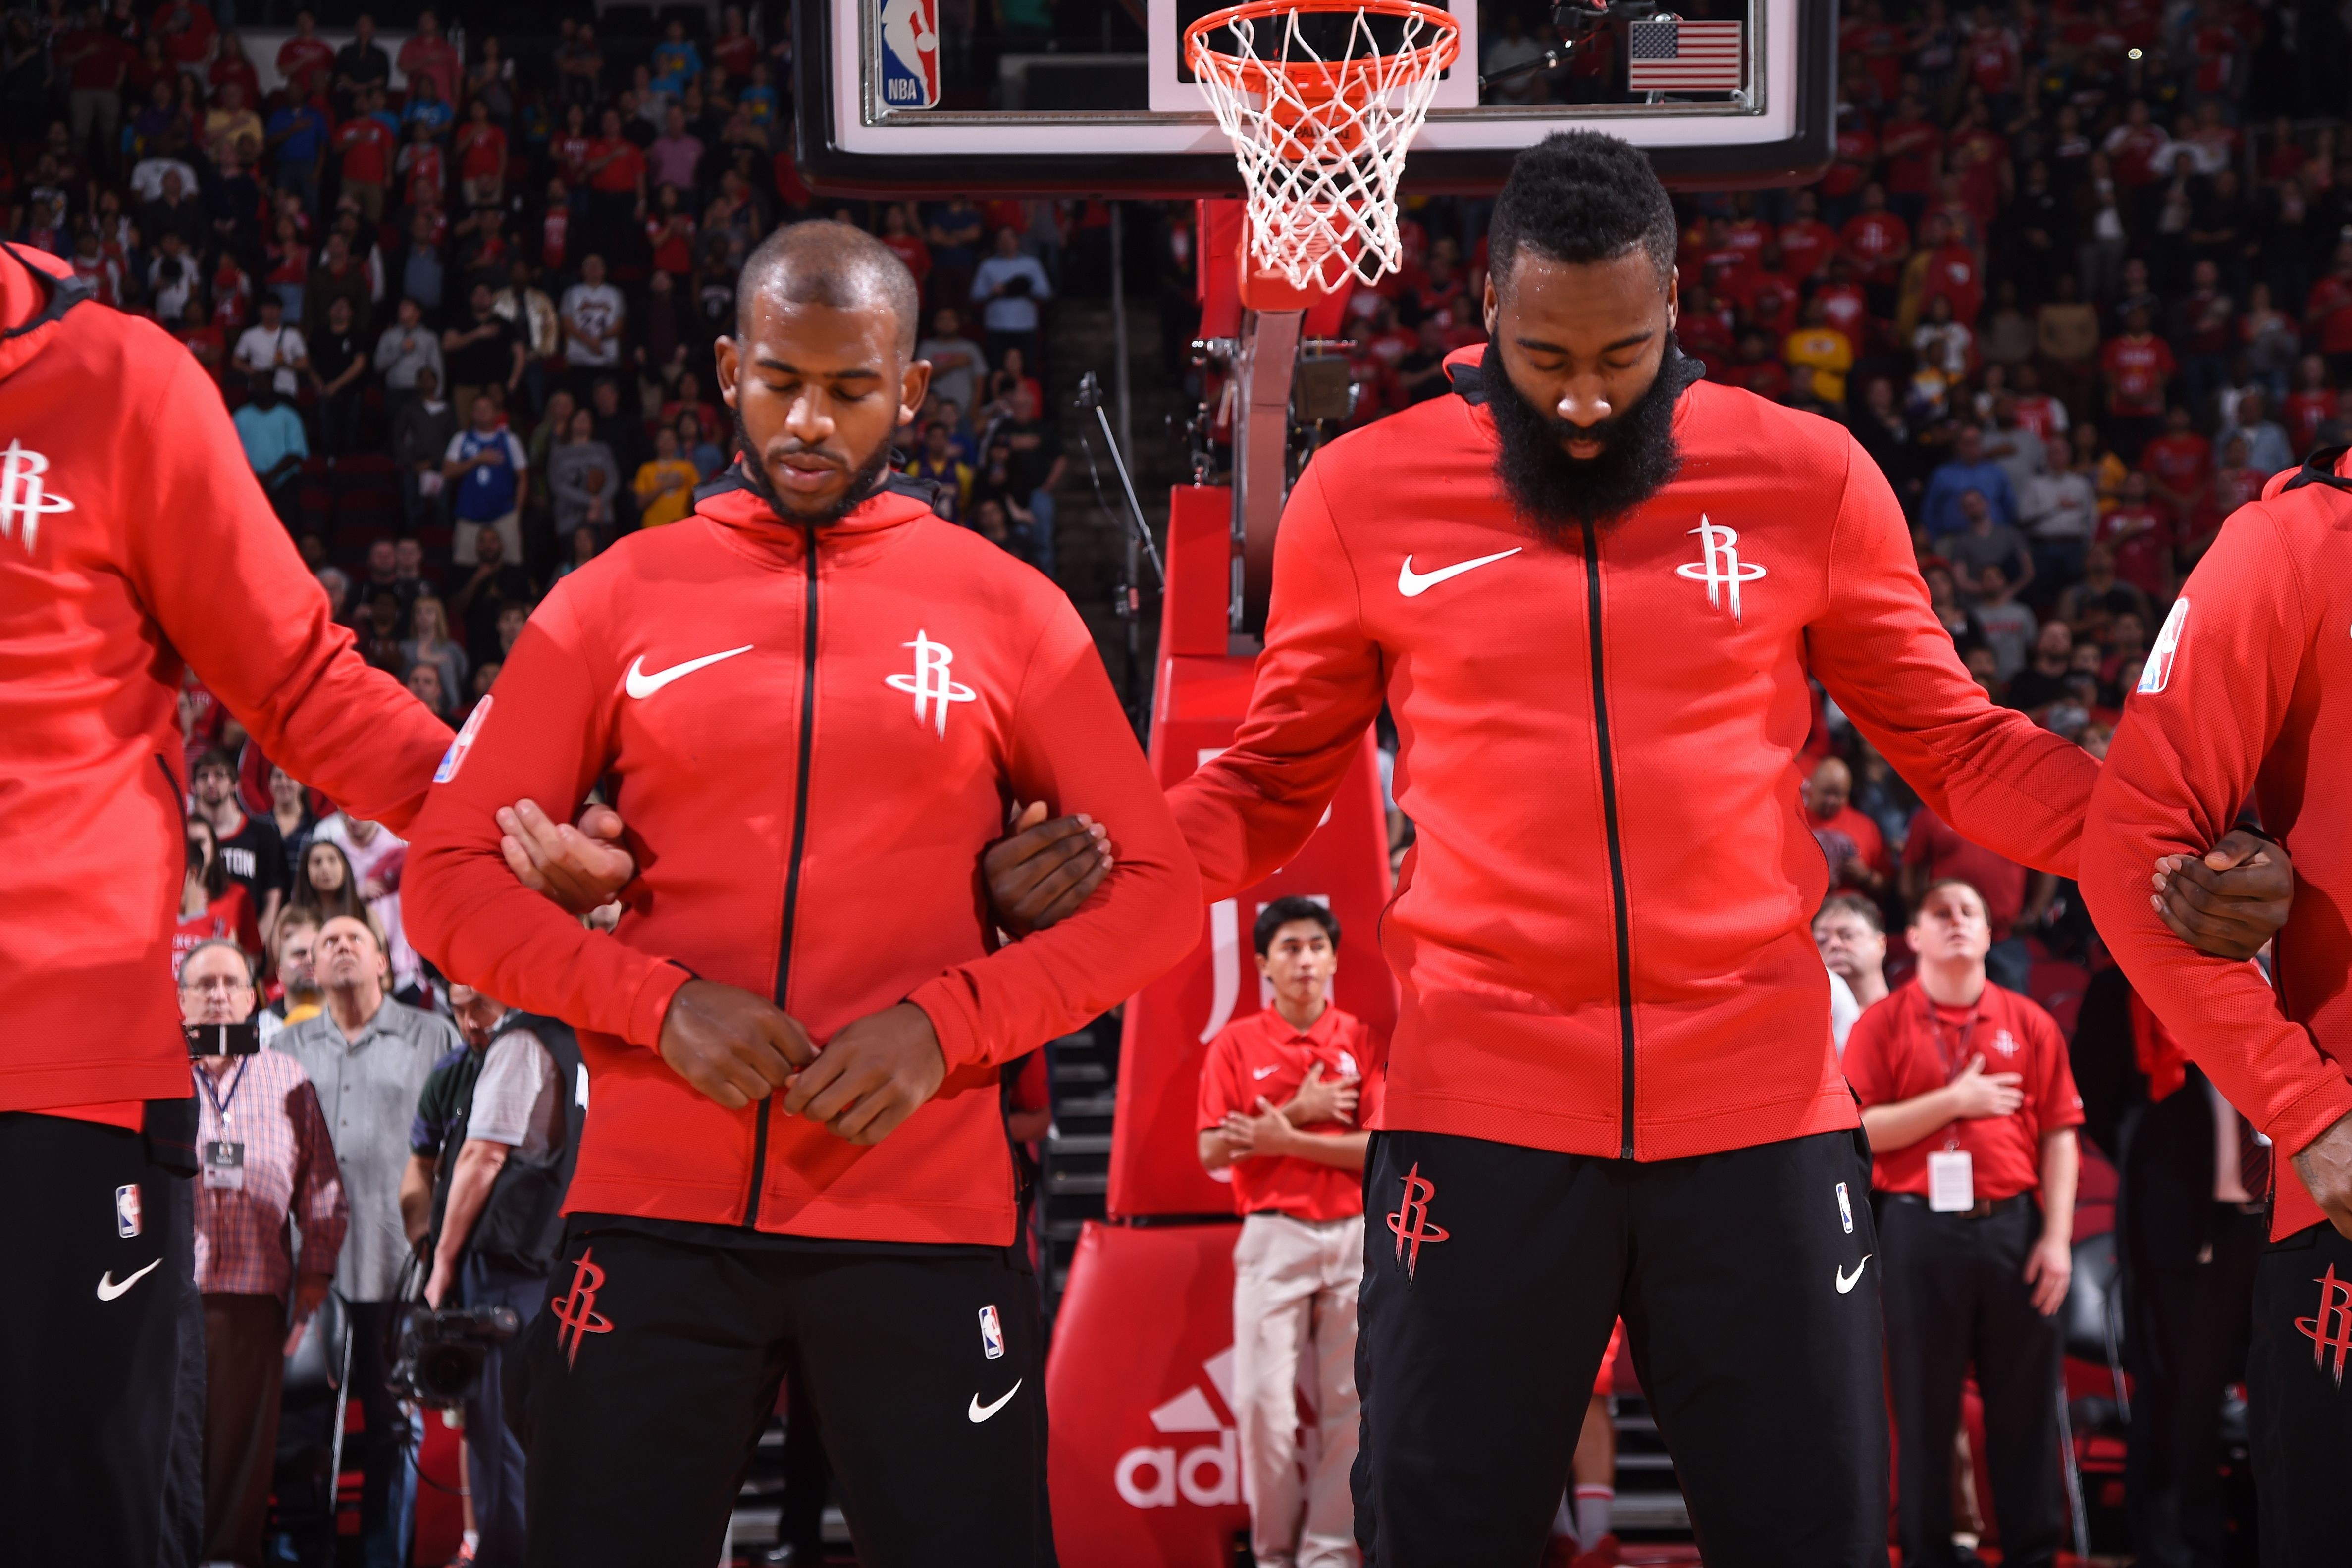 James Harden and Chris Paul are set to appear in the 2018 All-Star Game